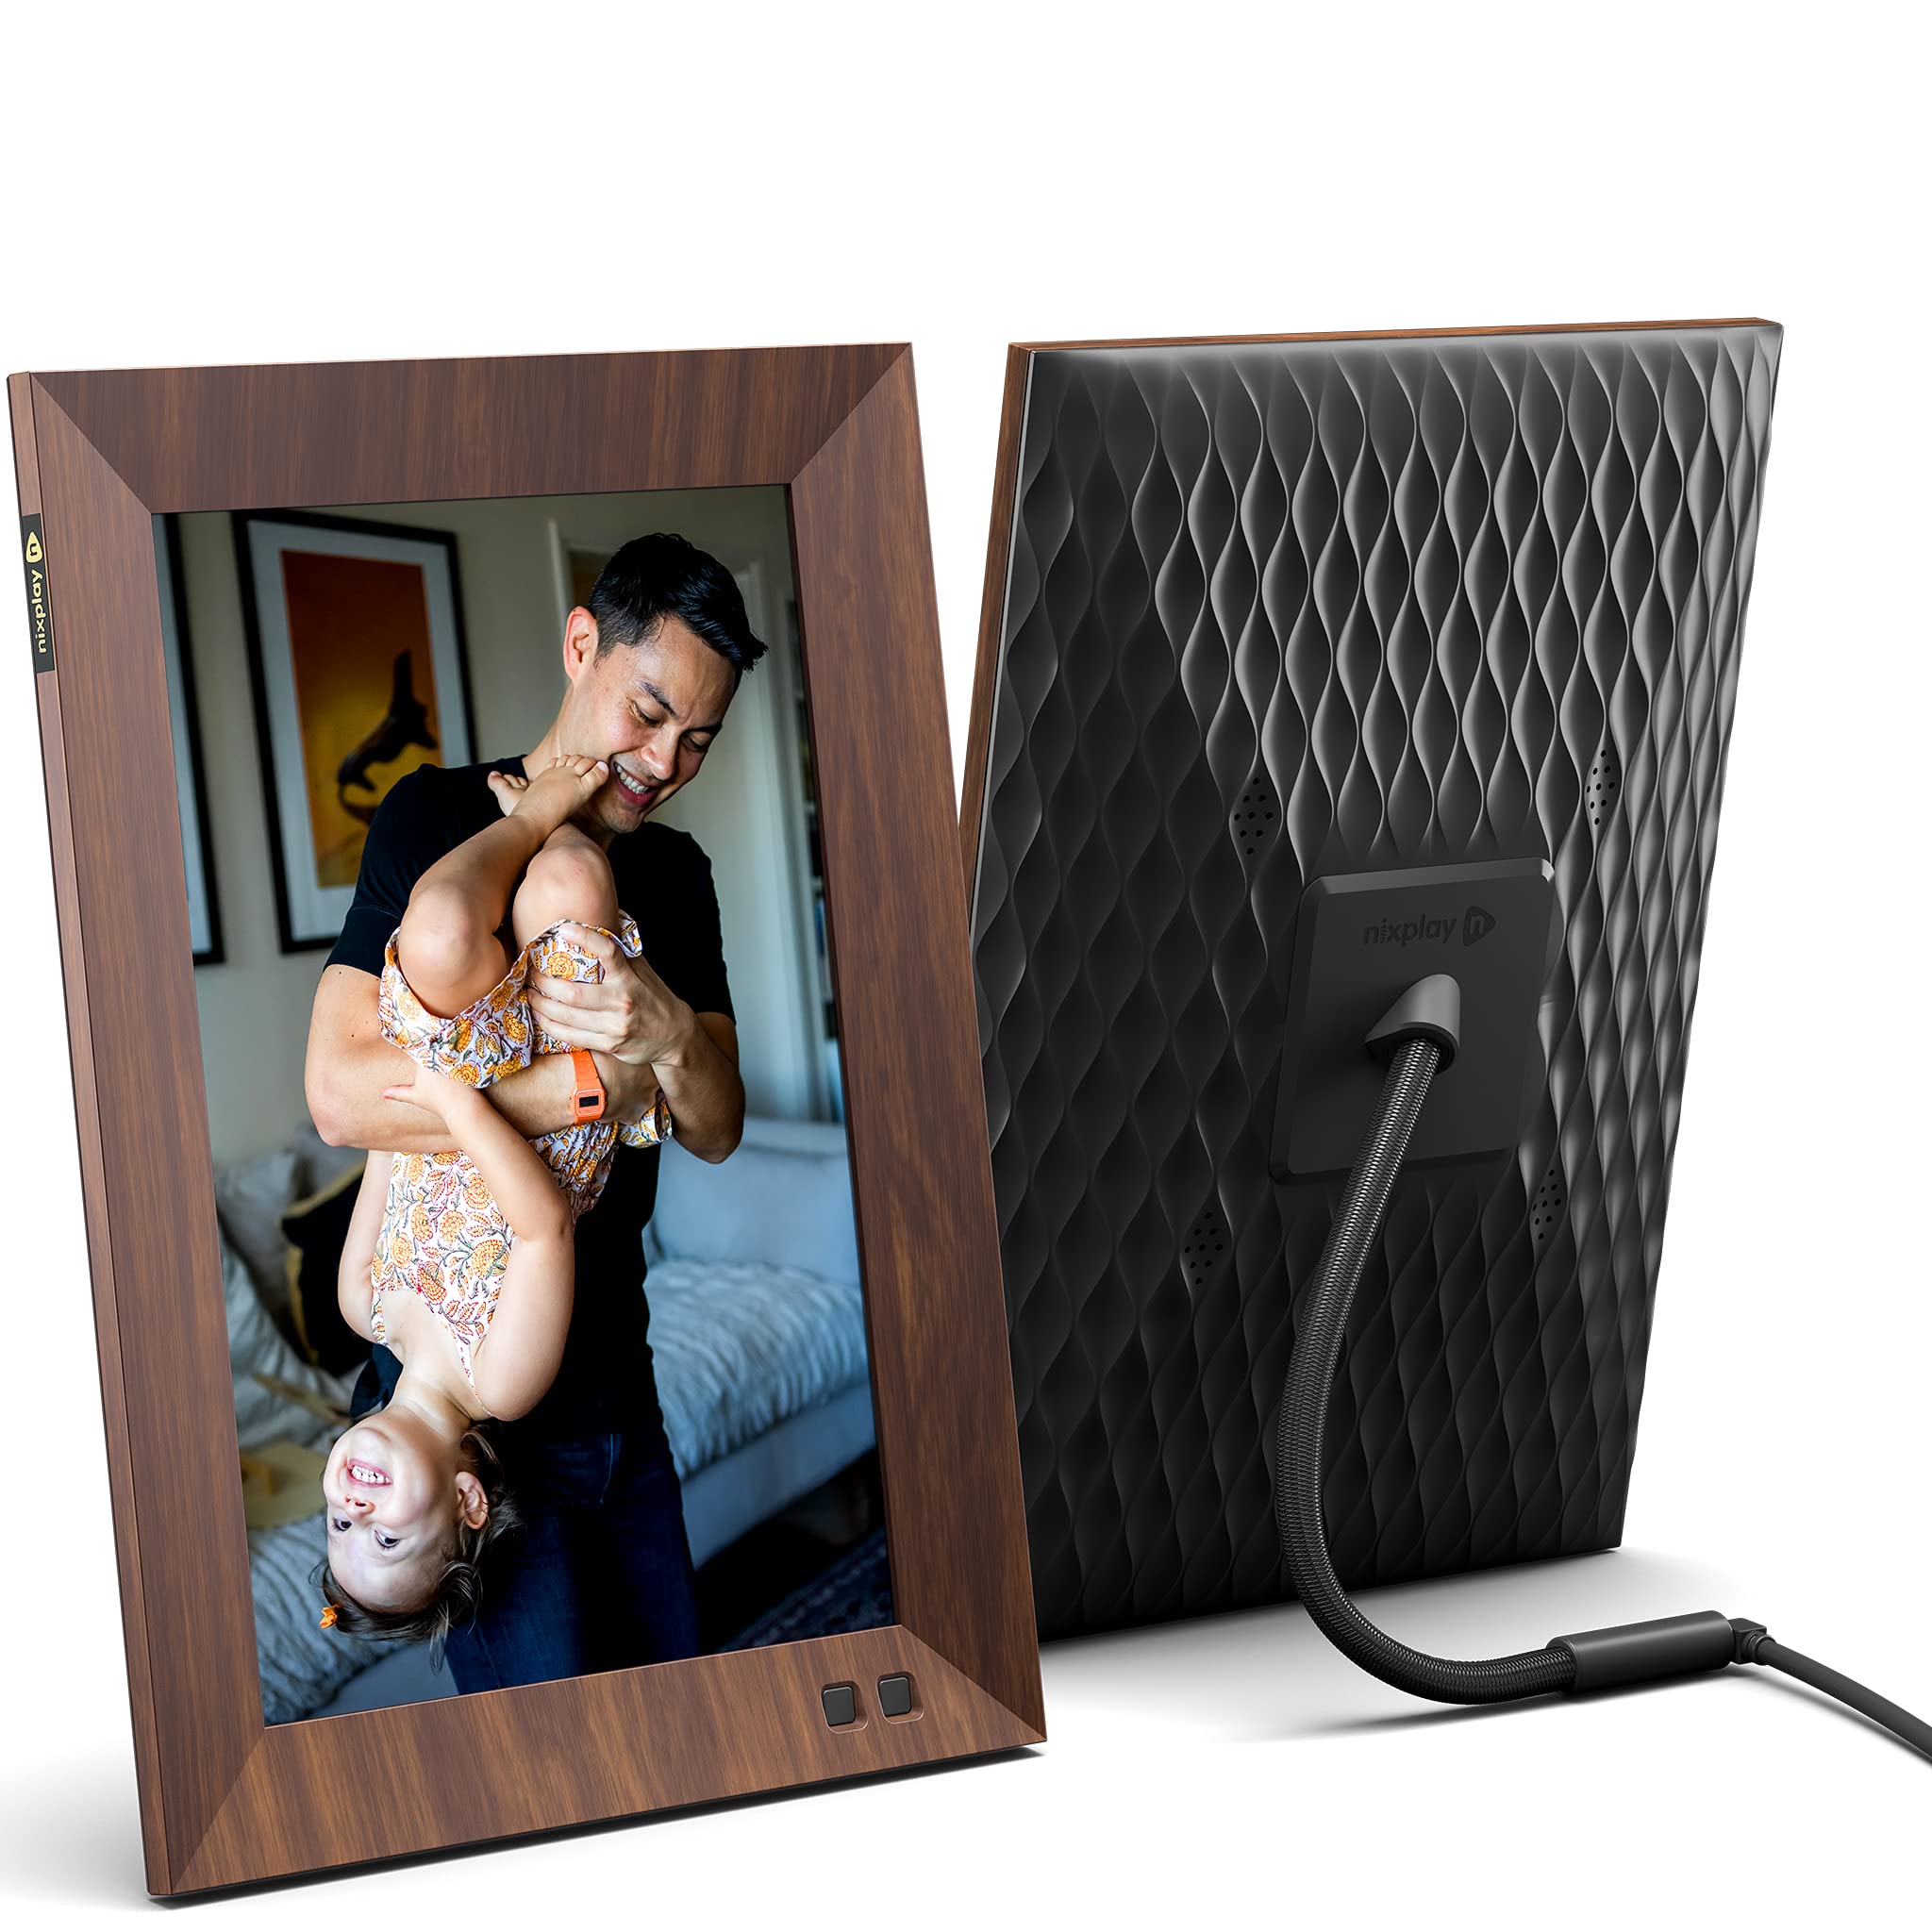 Nixplay 10.1 inch Smart Digital Photo Frame with WiFi (W10J) - Wood Effect - Share Photos and Videos Instantly